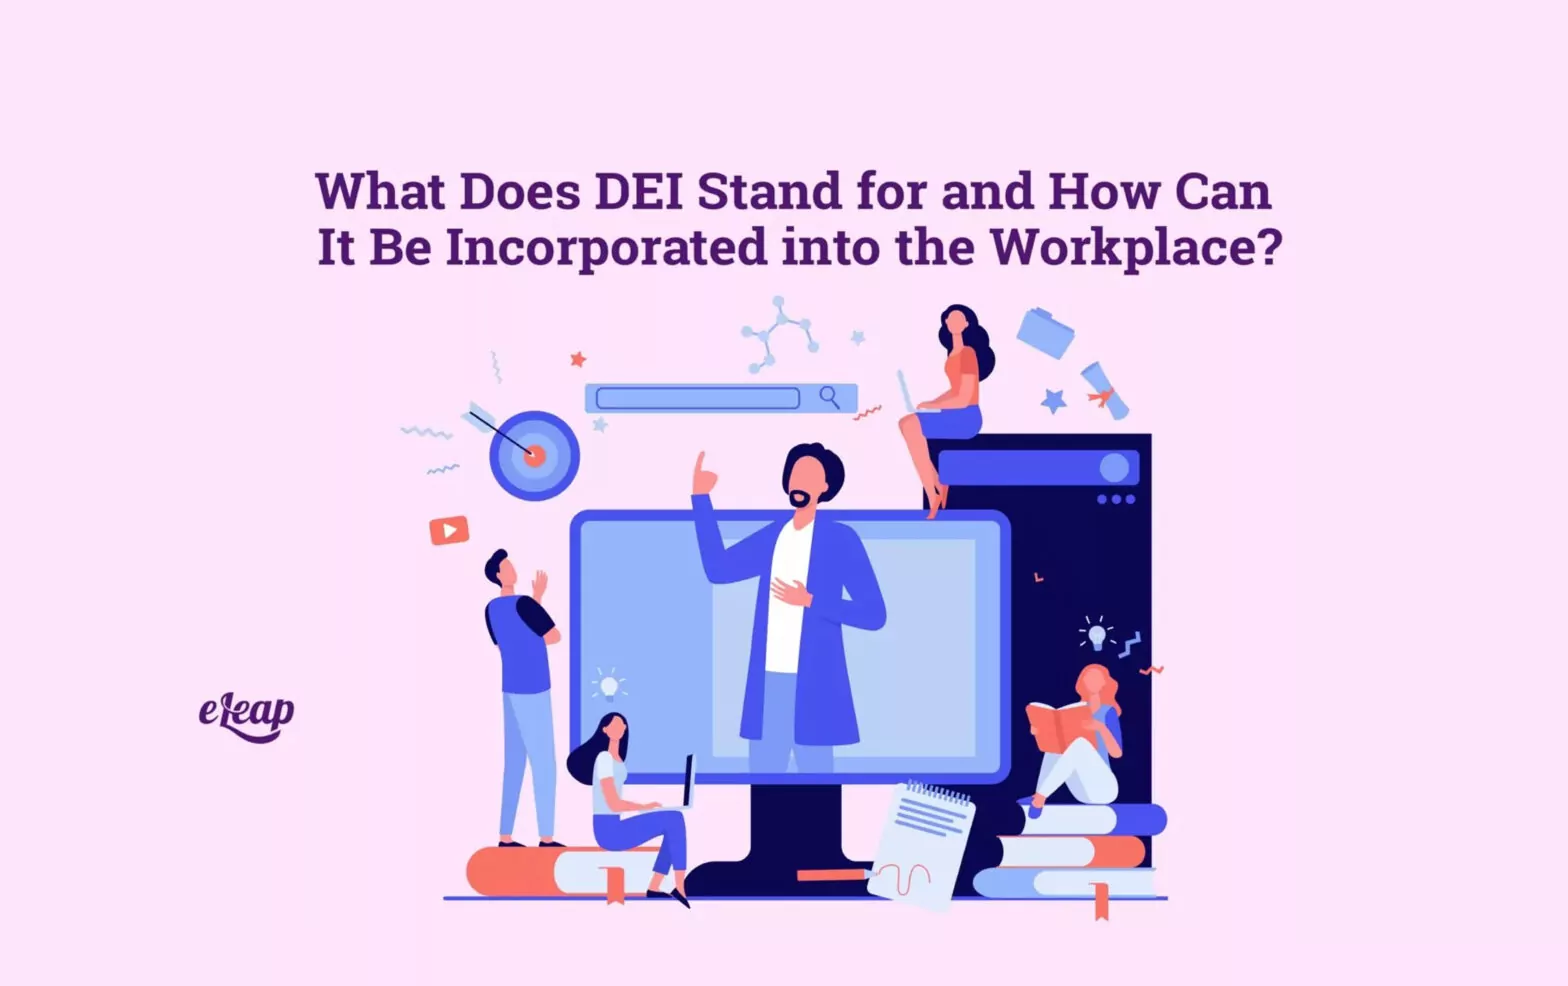 What Does DEI Stand for and How Can It Be Incorporated into the Workplace?